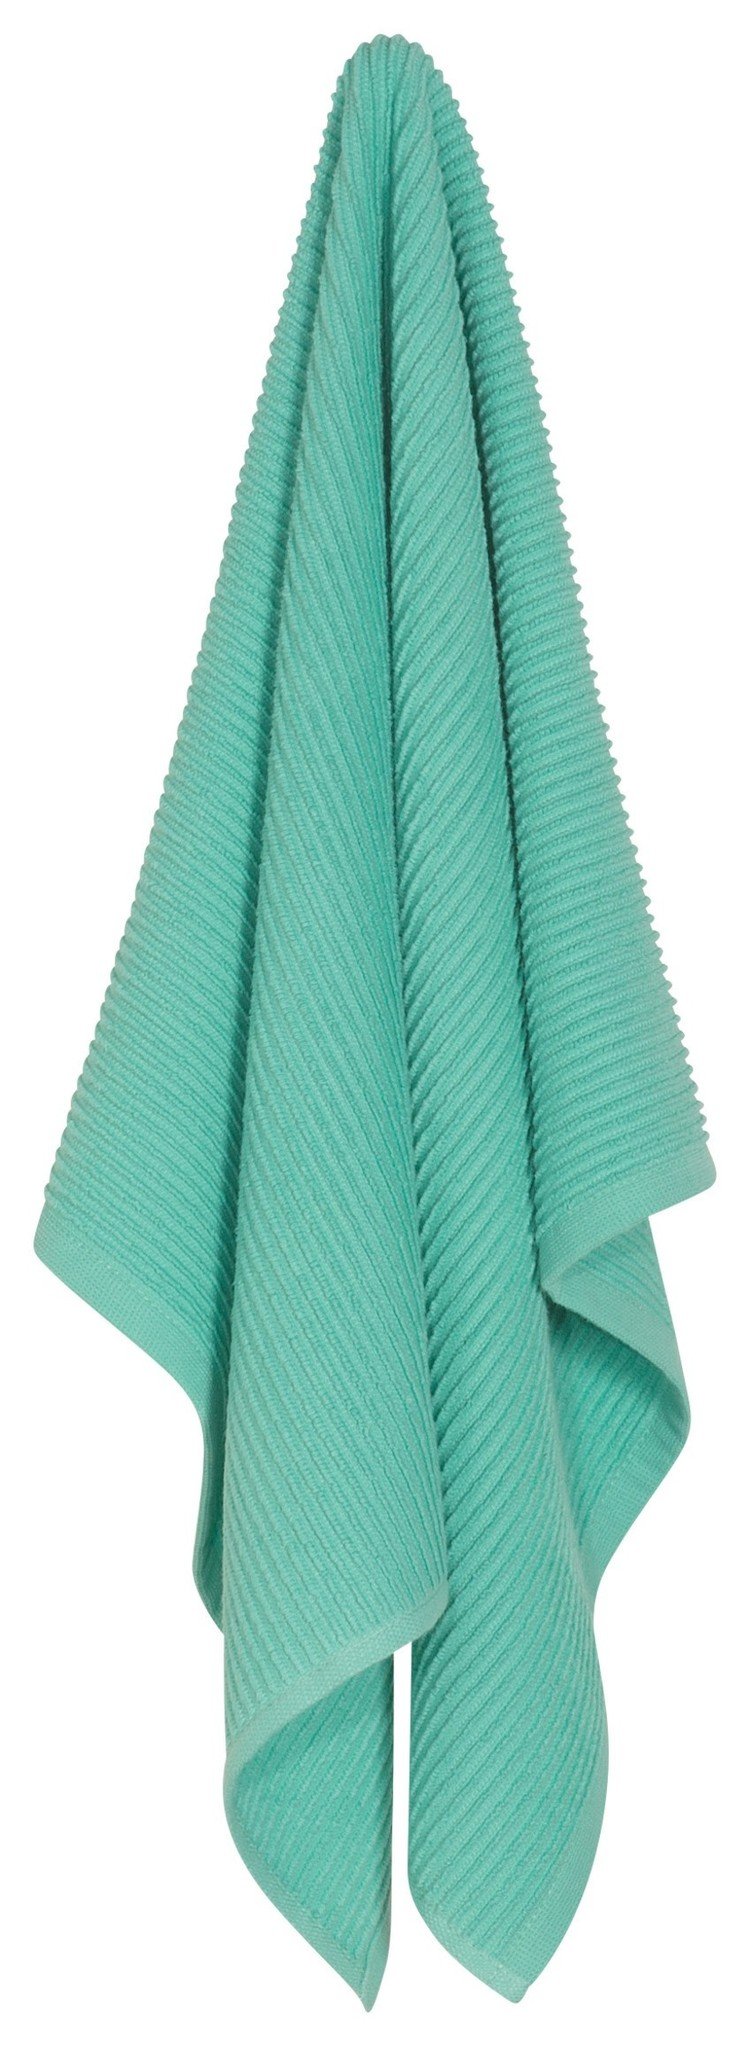 Now Designs Ripple Dish Towel - Lucite Green